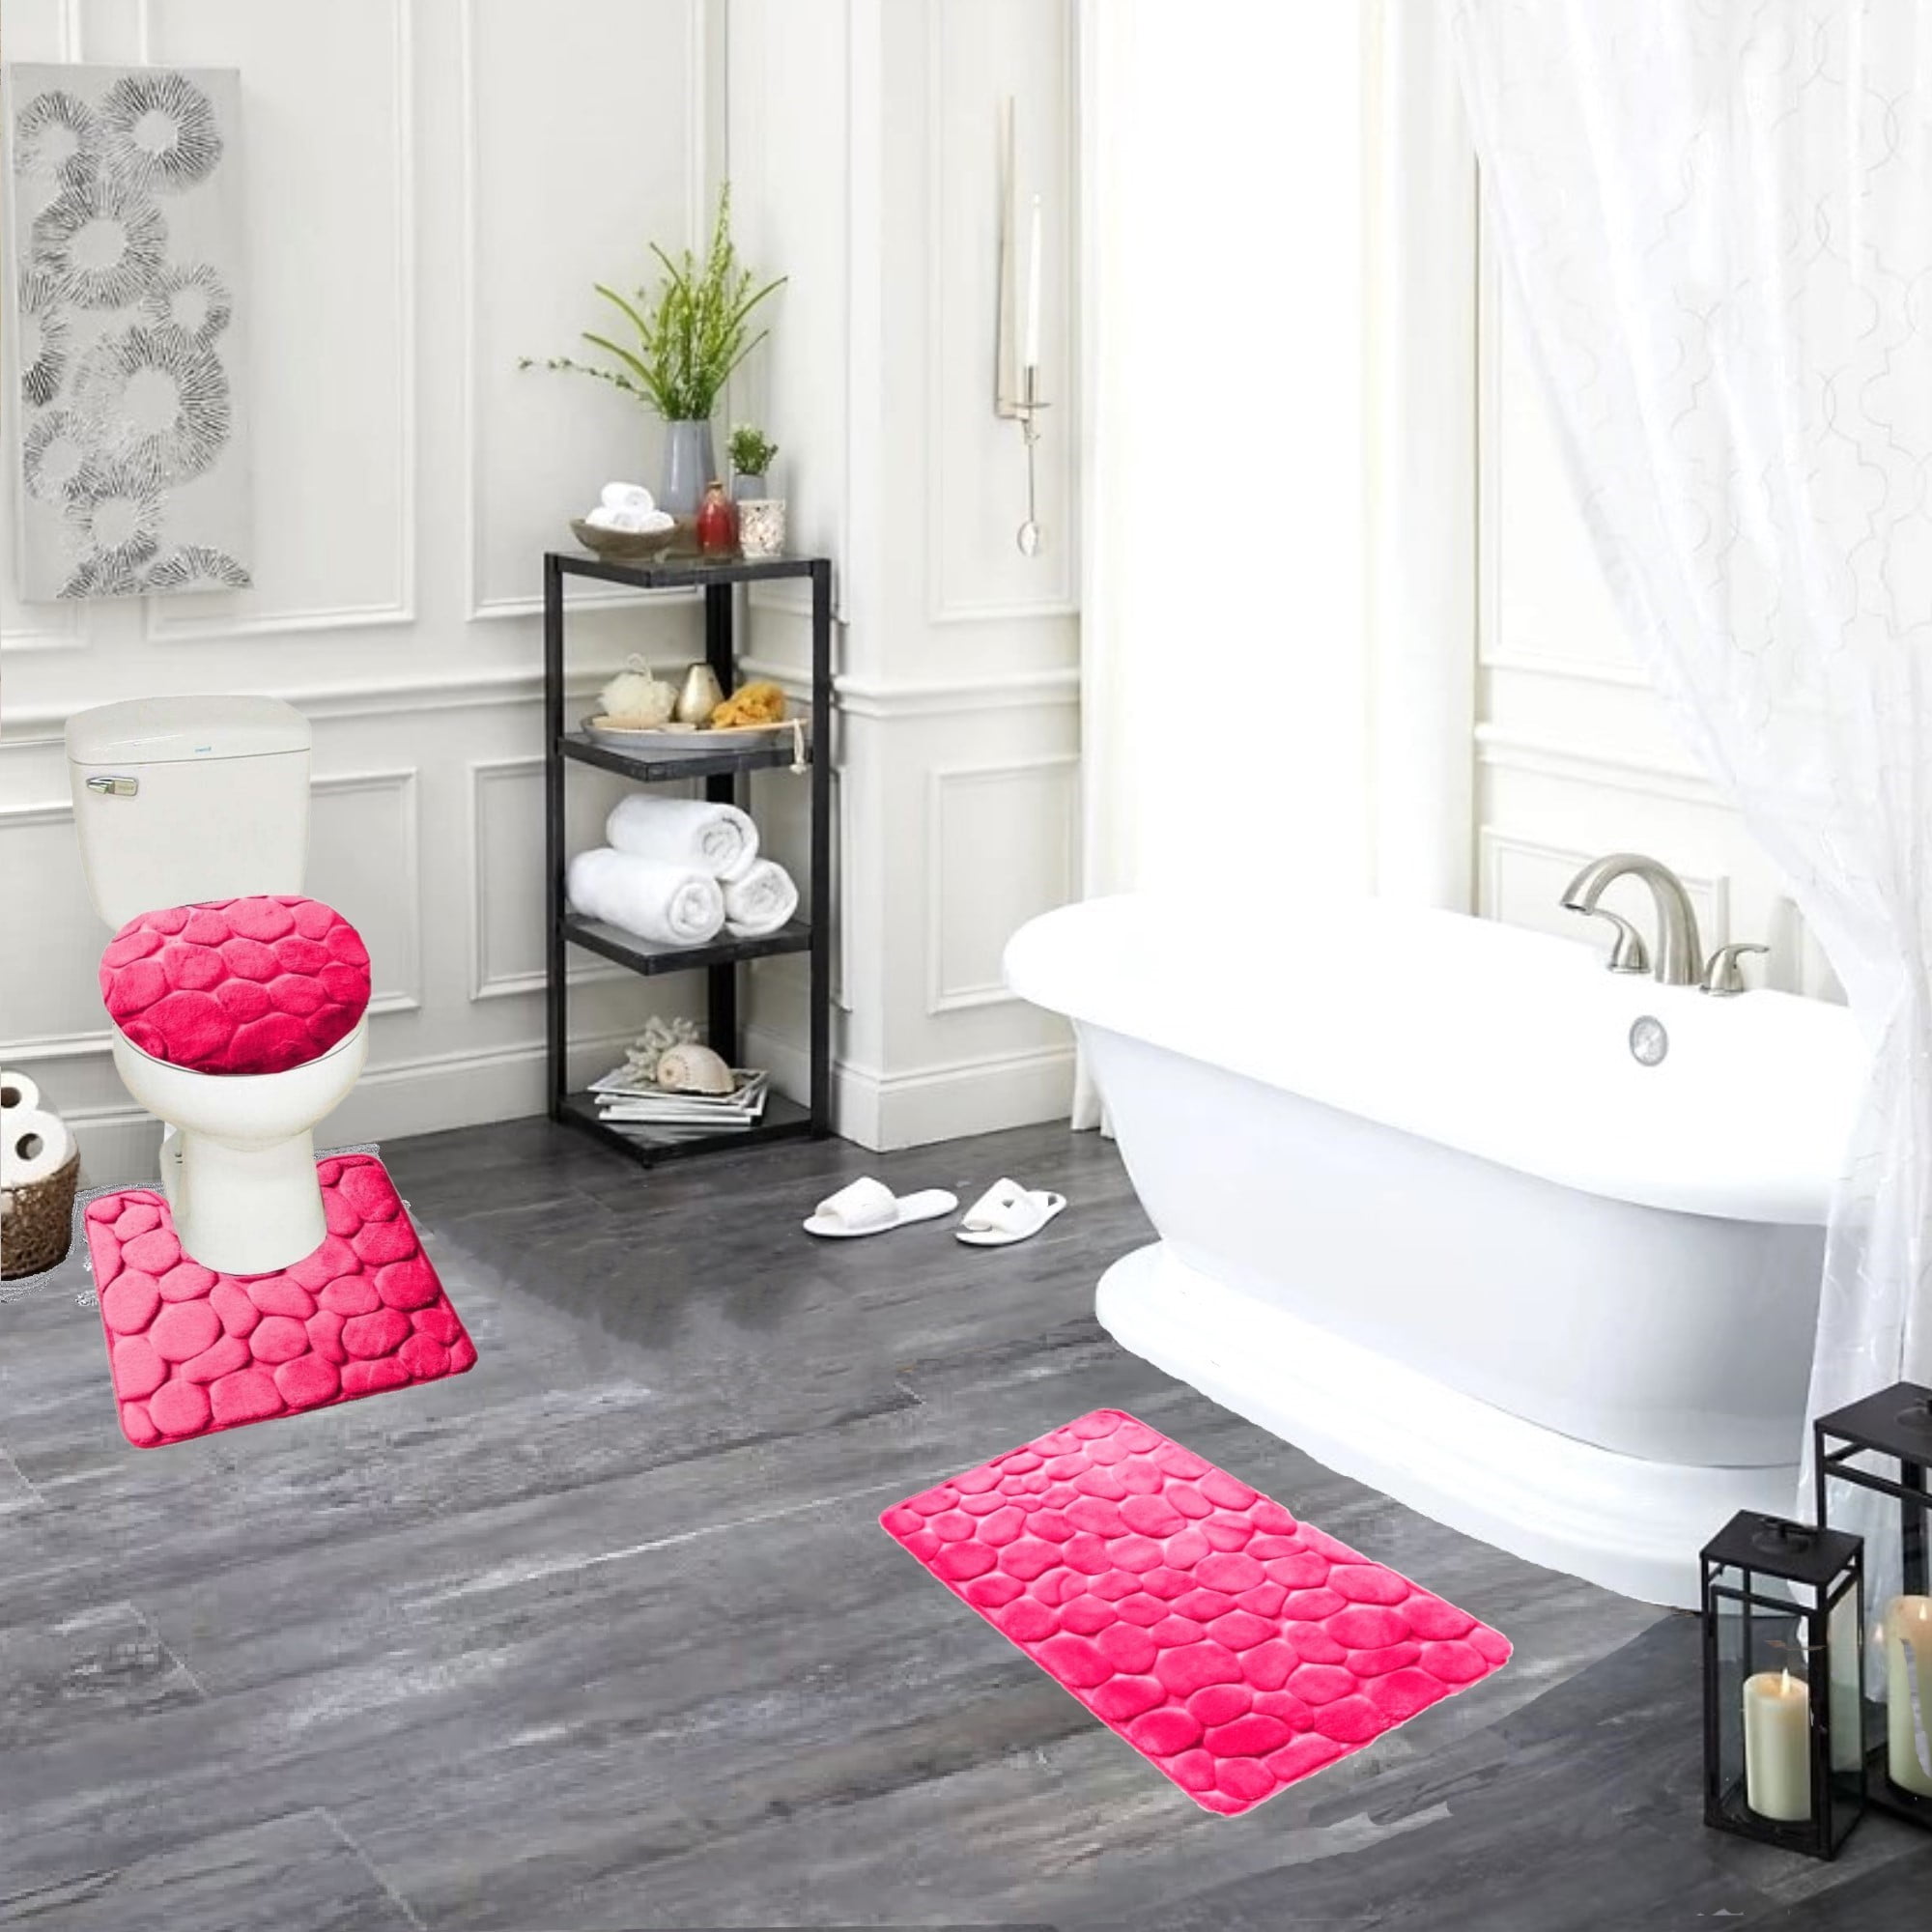 Adding a pink and gray vintage bath rug to an all-white bathroom brings a  soft, calming feels to a cle…